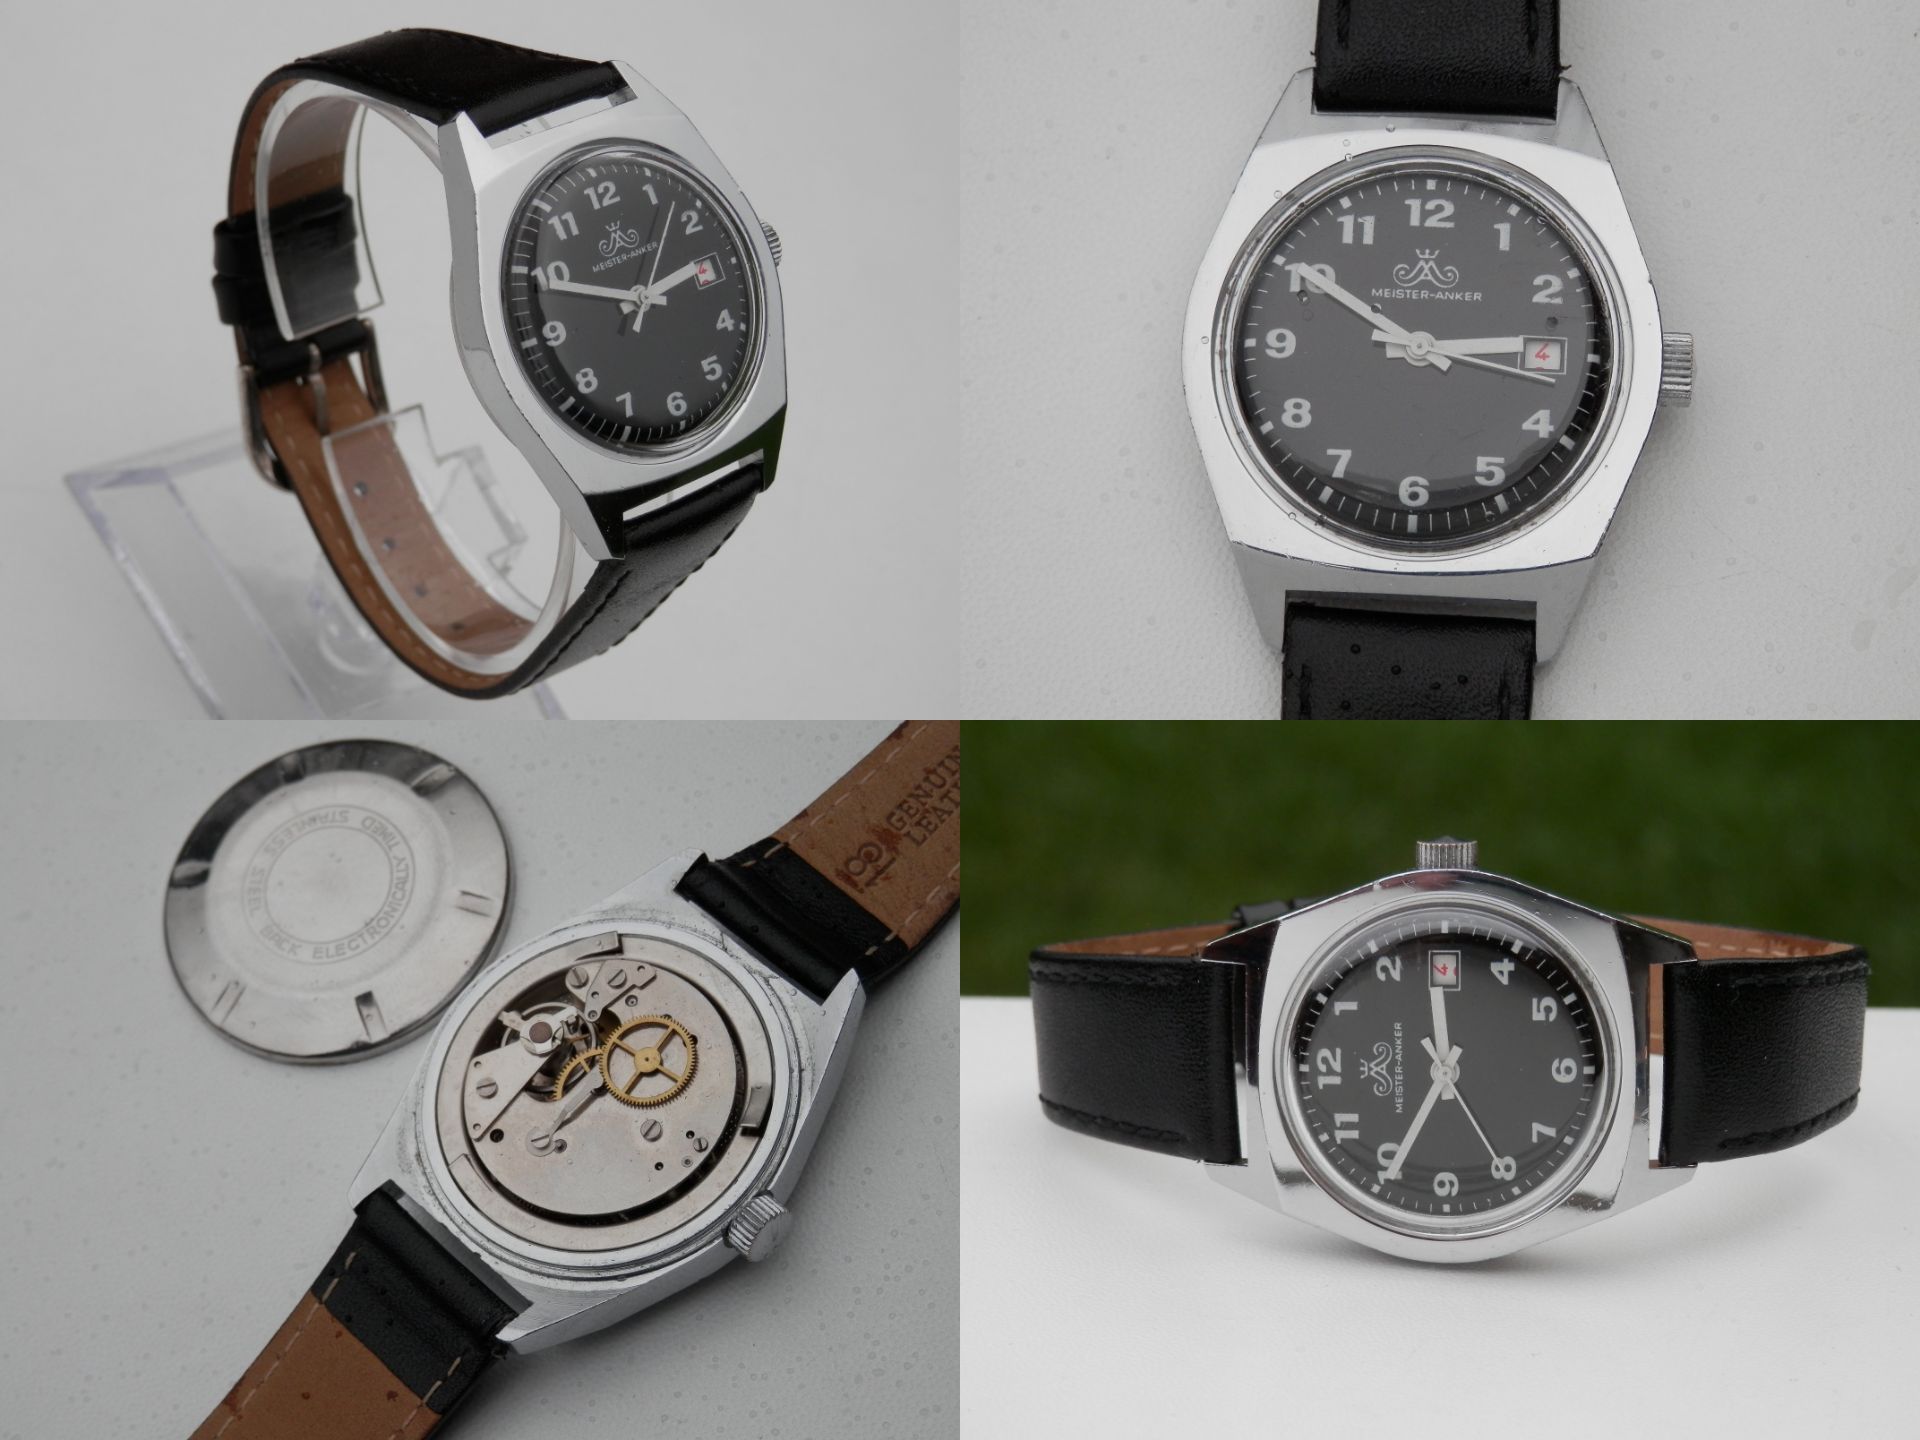 SUPERB RARE GENTS 1960S GERMAN MADE MEISTER ANKER HAND WIND DATE WATCH.